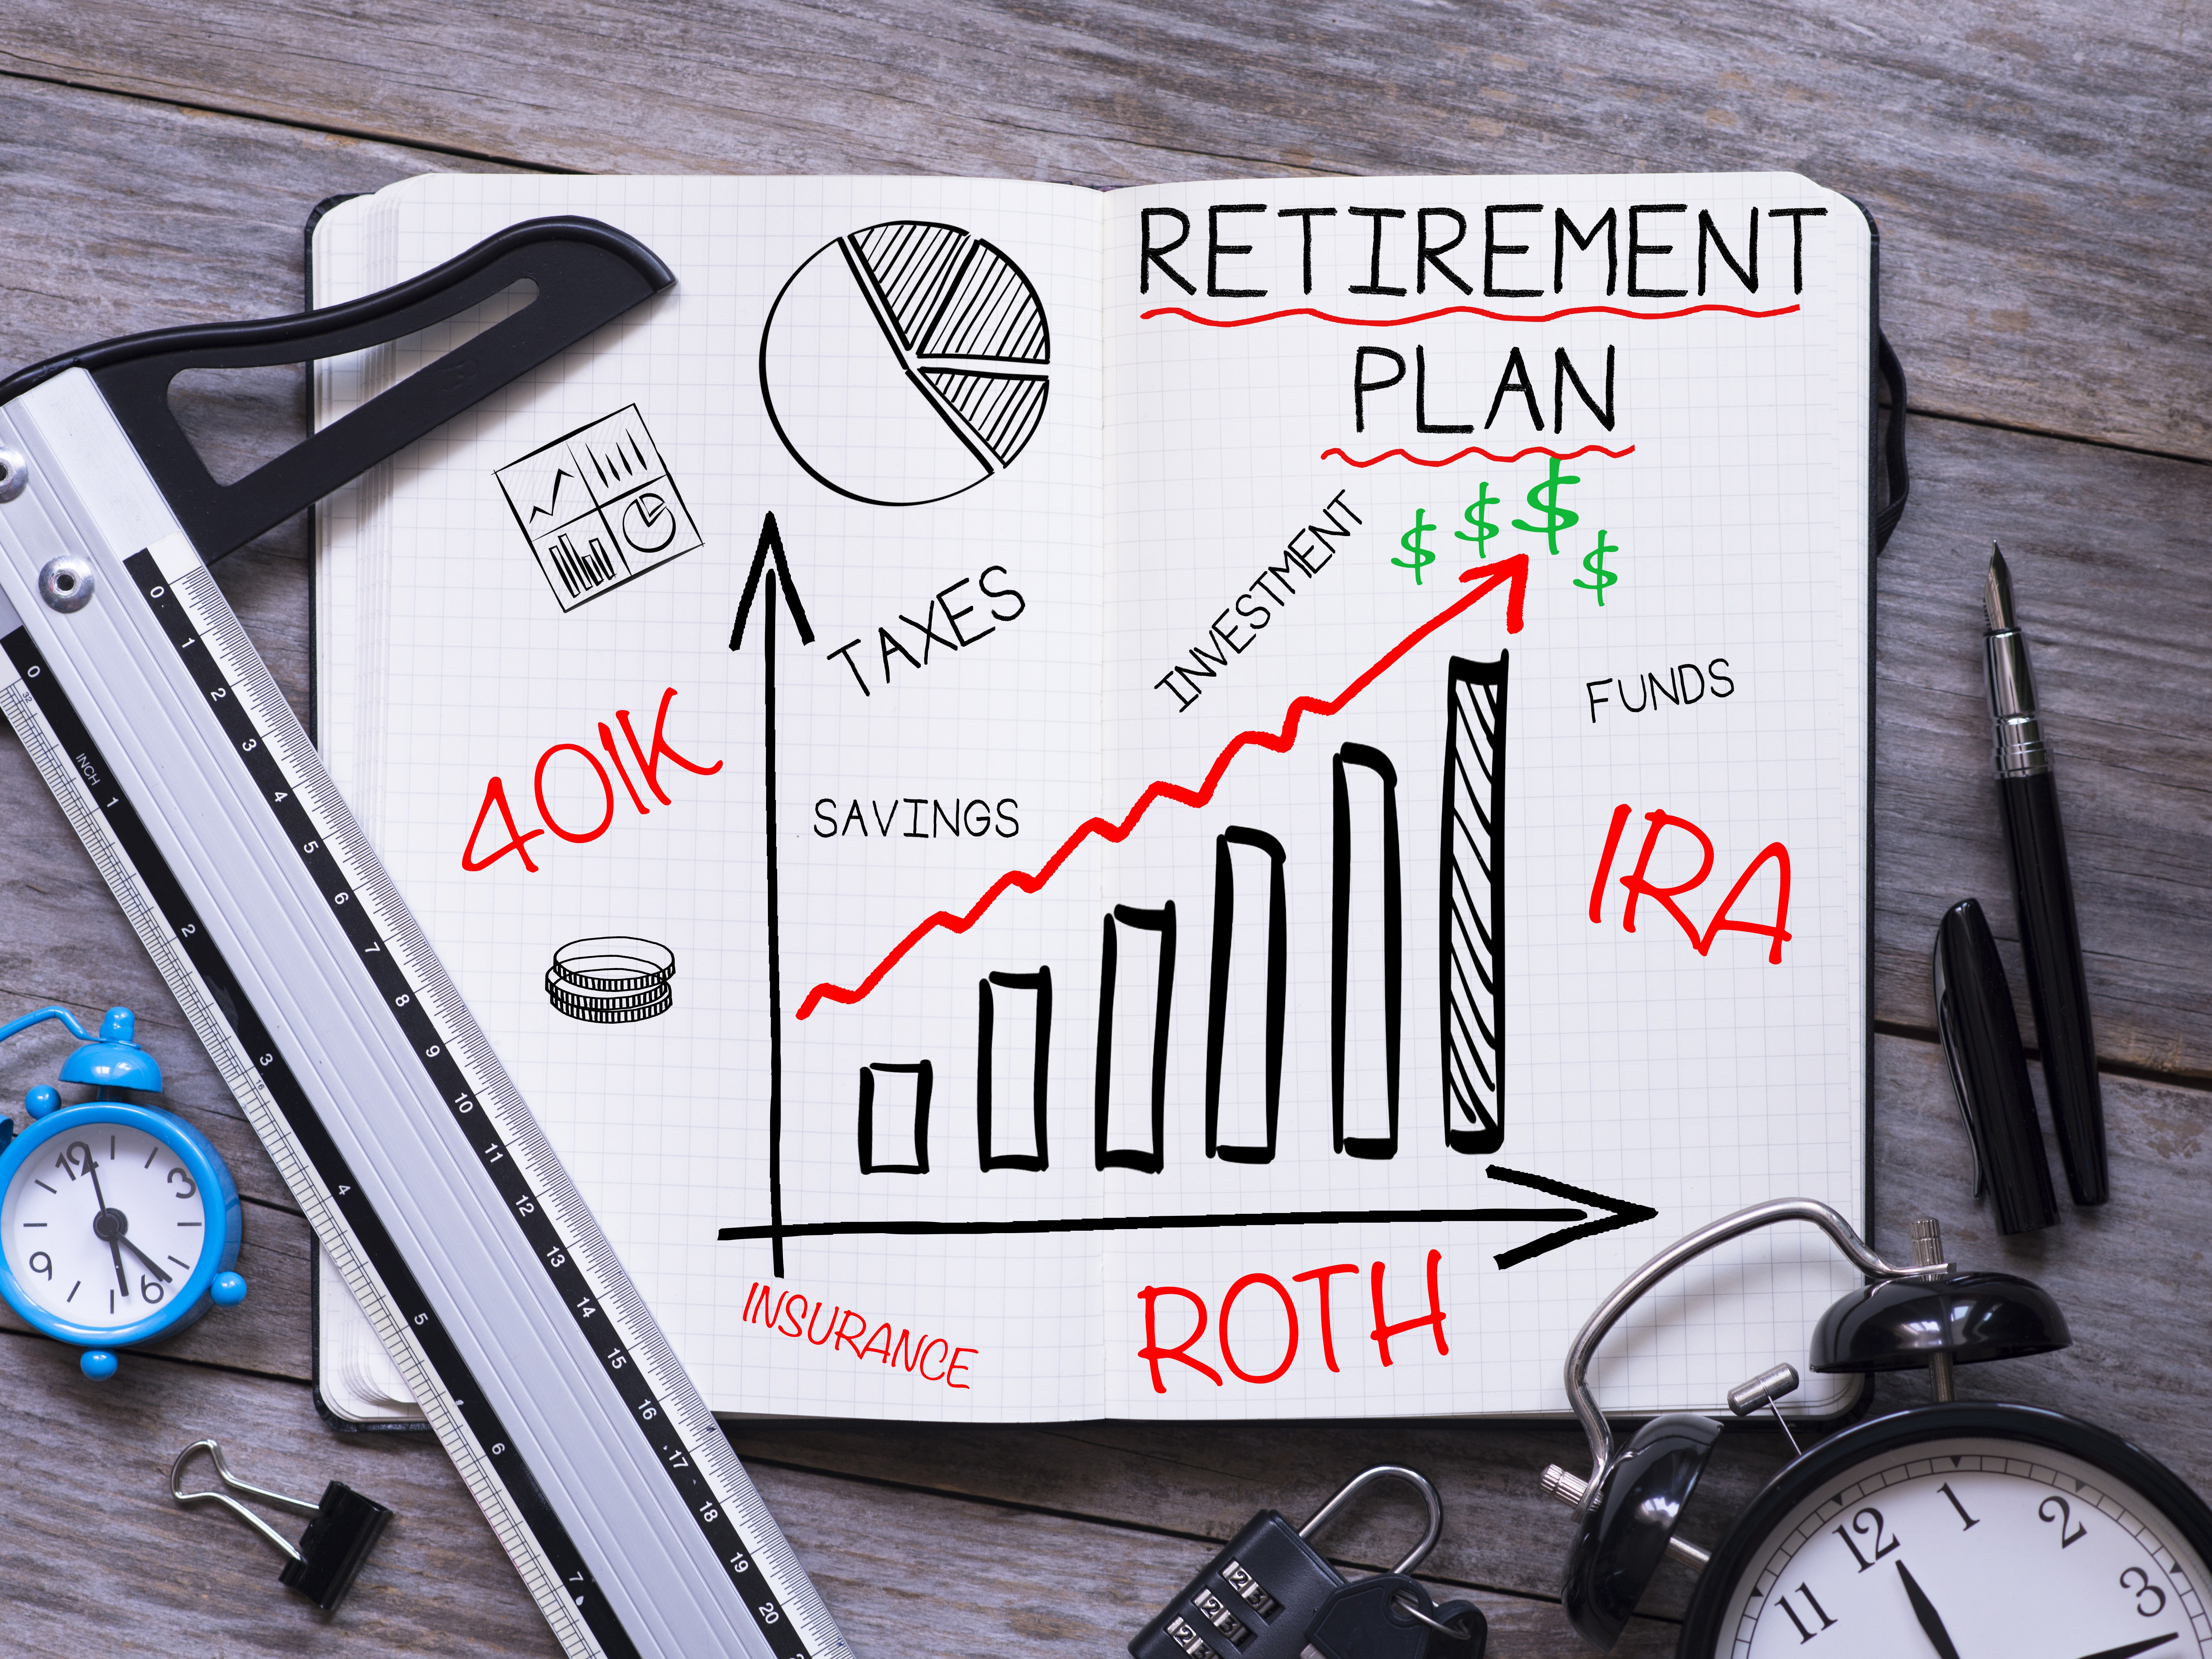 How To Roll Over A 401k To An Ira Fundamentals Explained